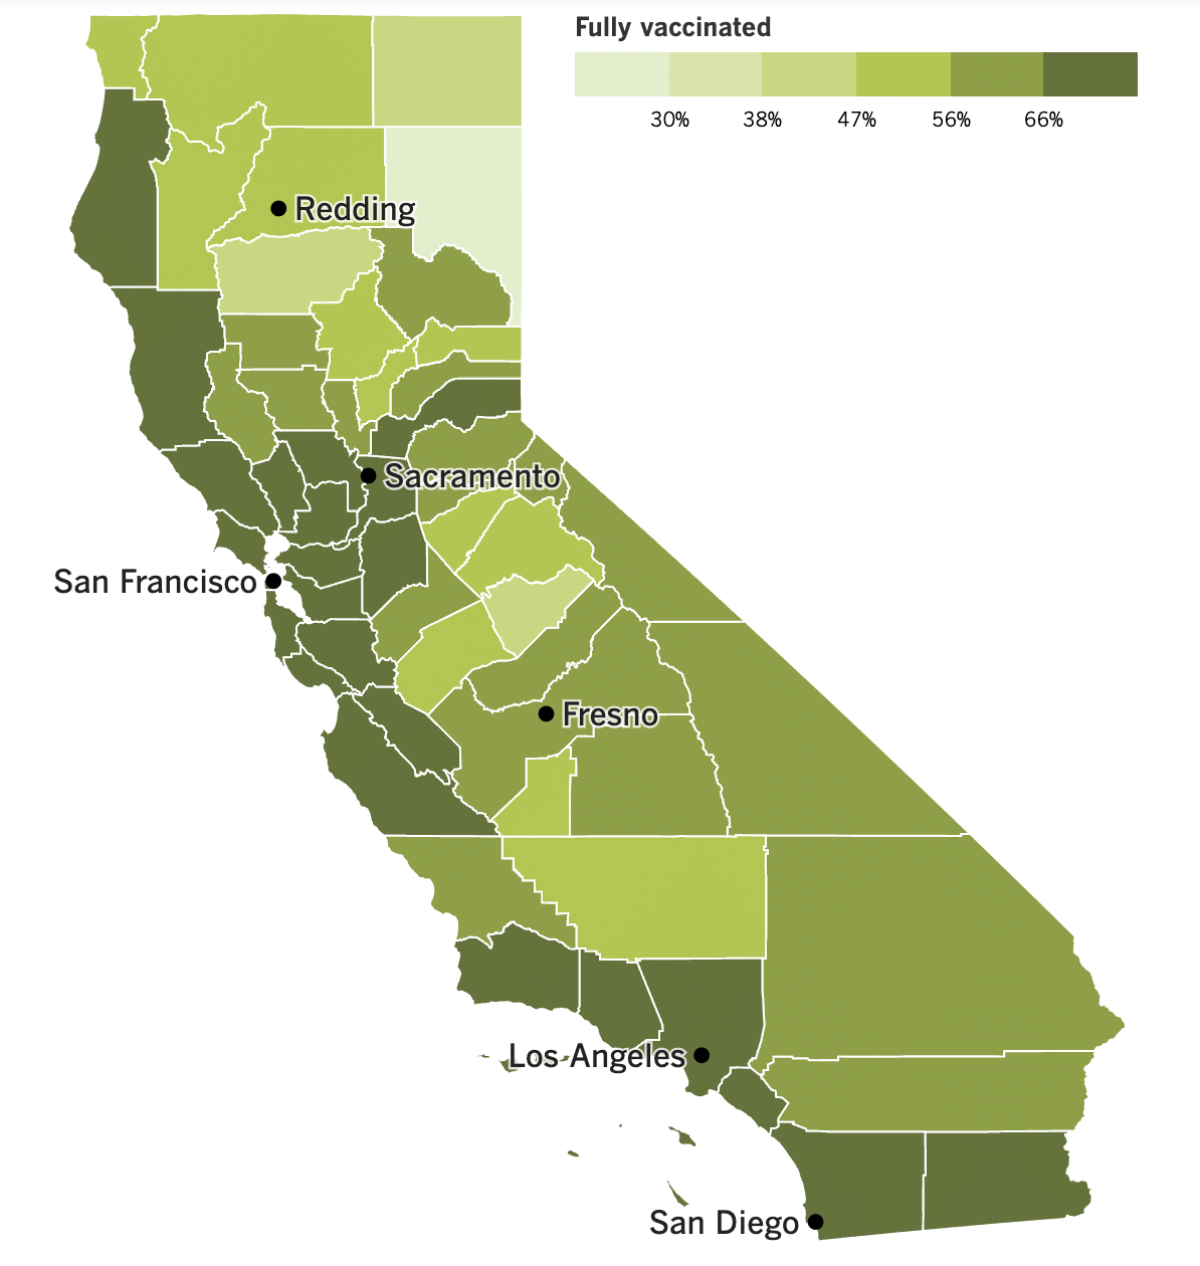 A map showing California's vaccination progress by county as of Oct. 11, 2022.